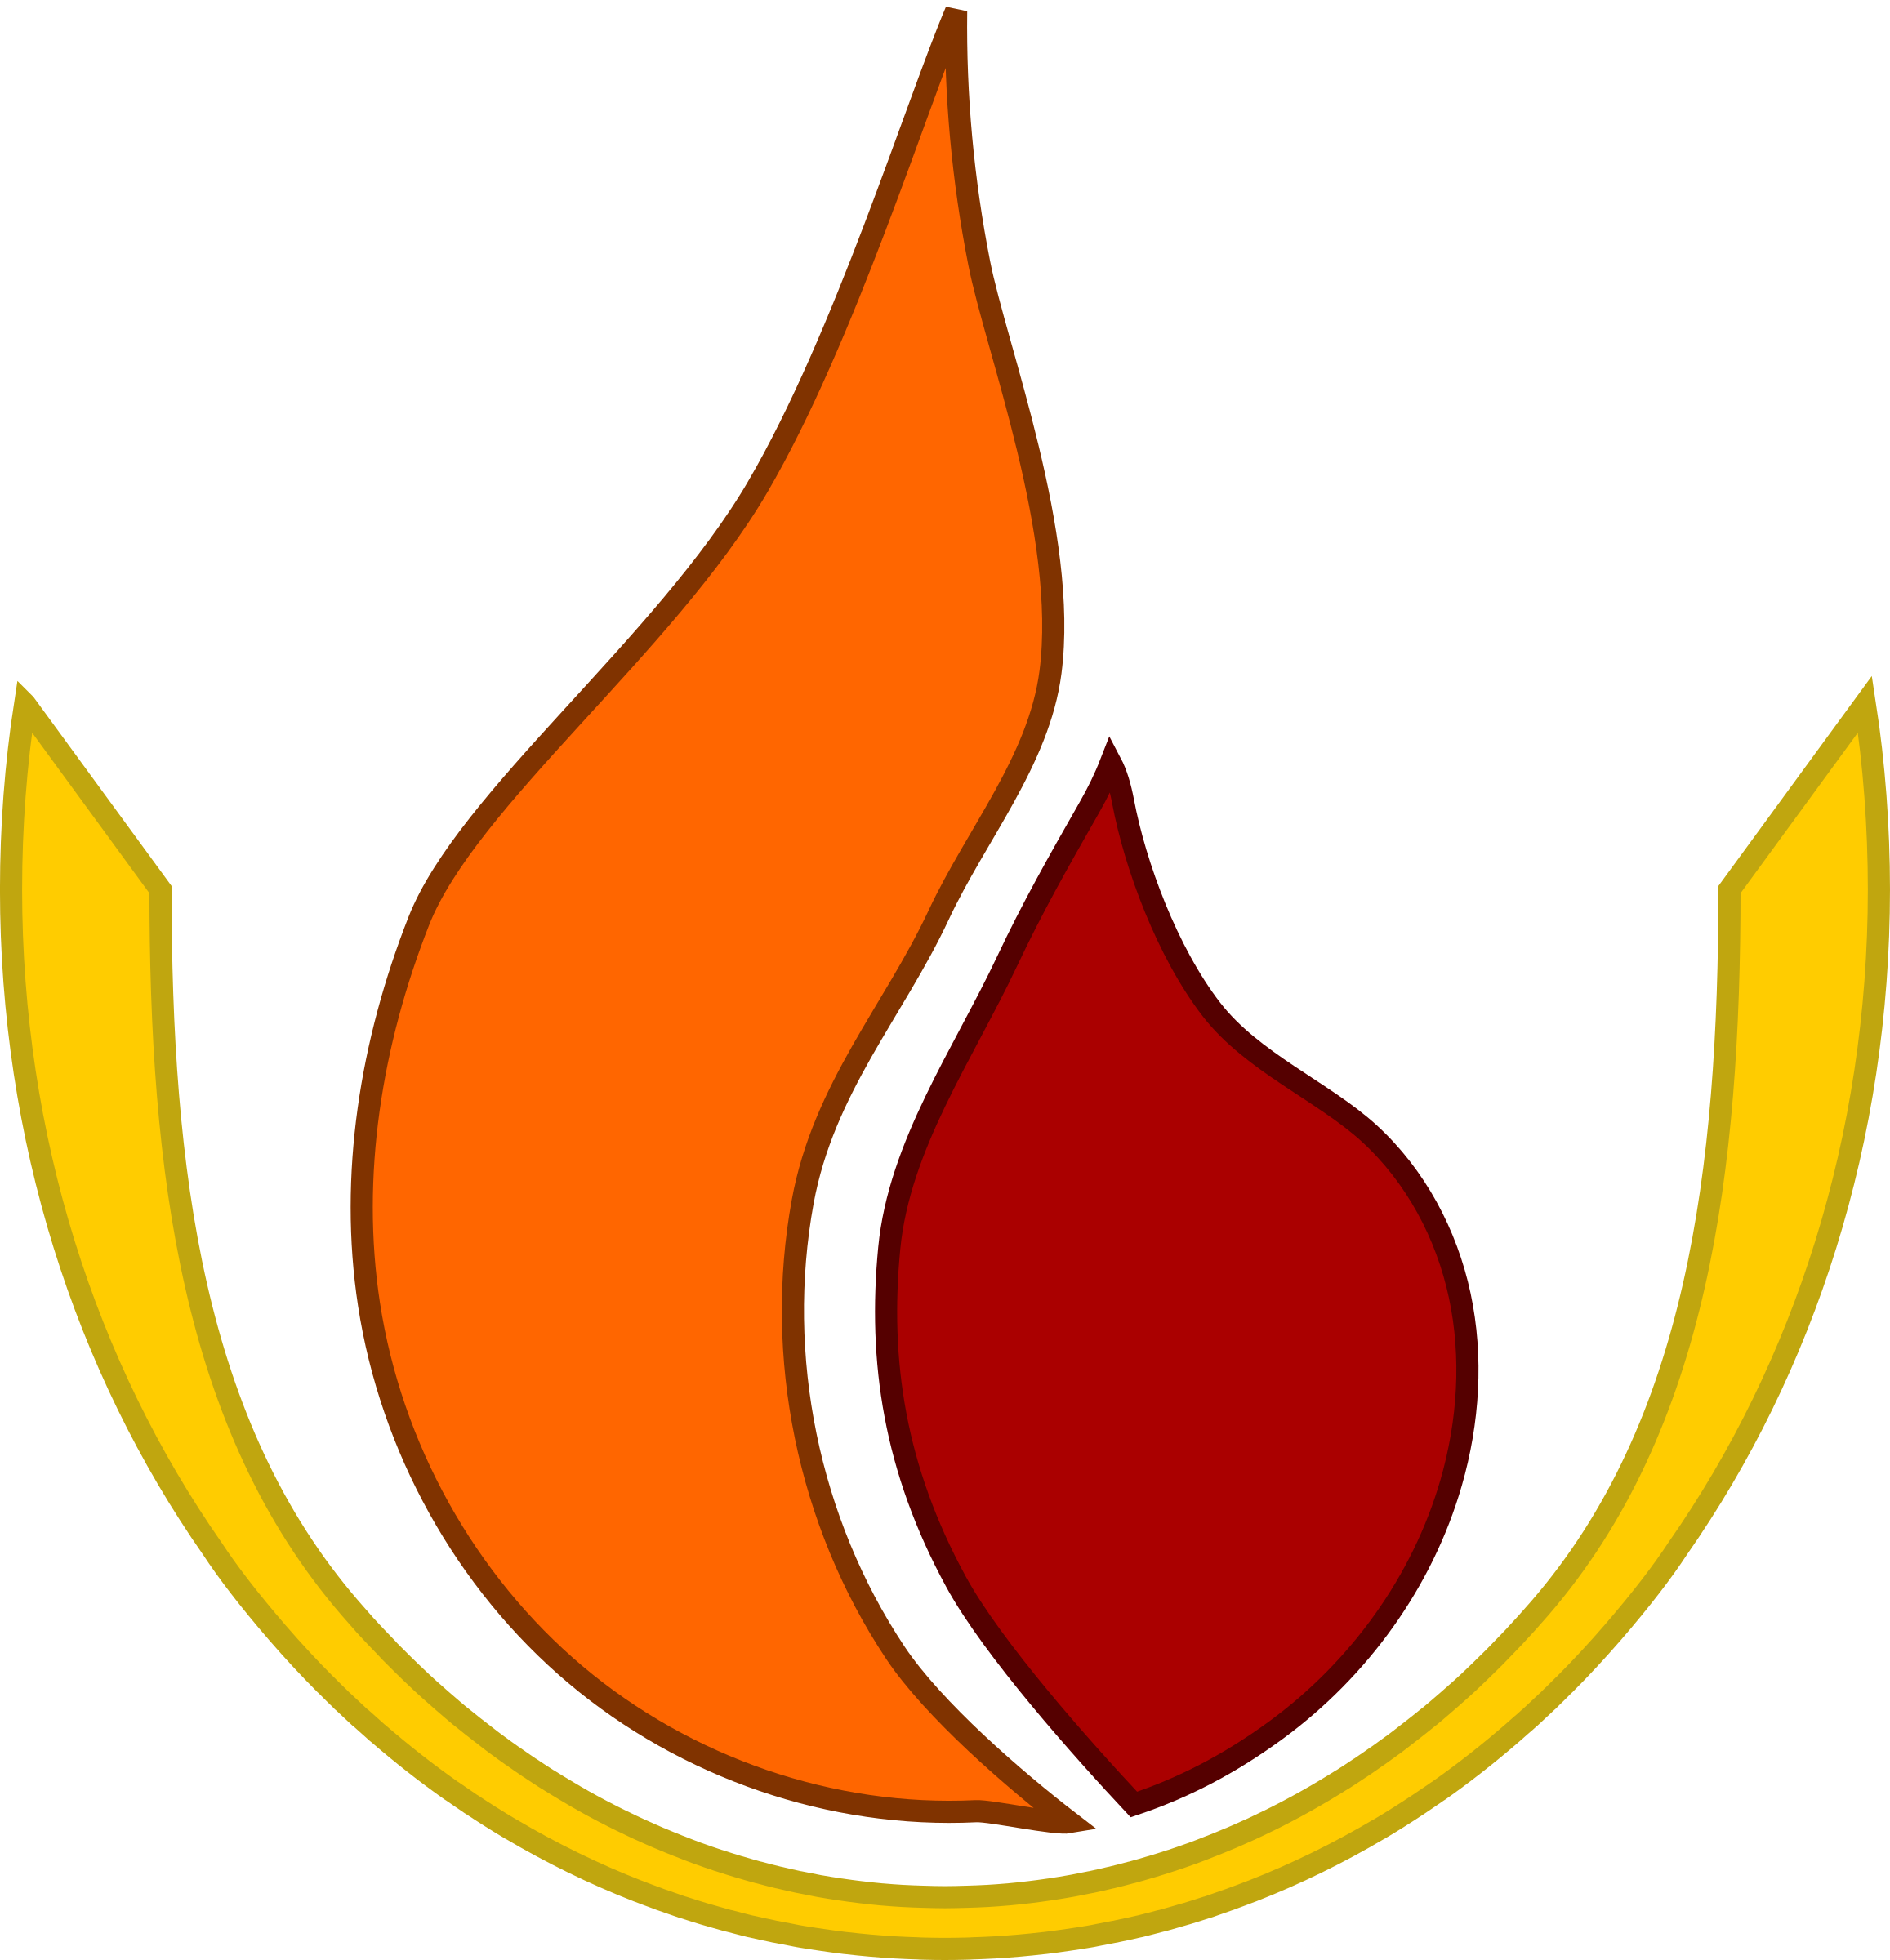 Flames clipart simple fire. Flame logo big image